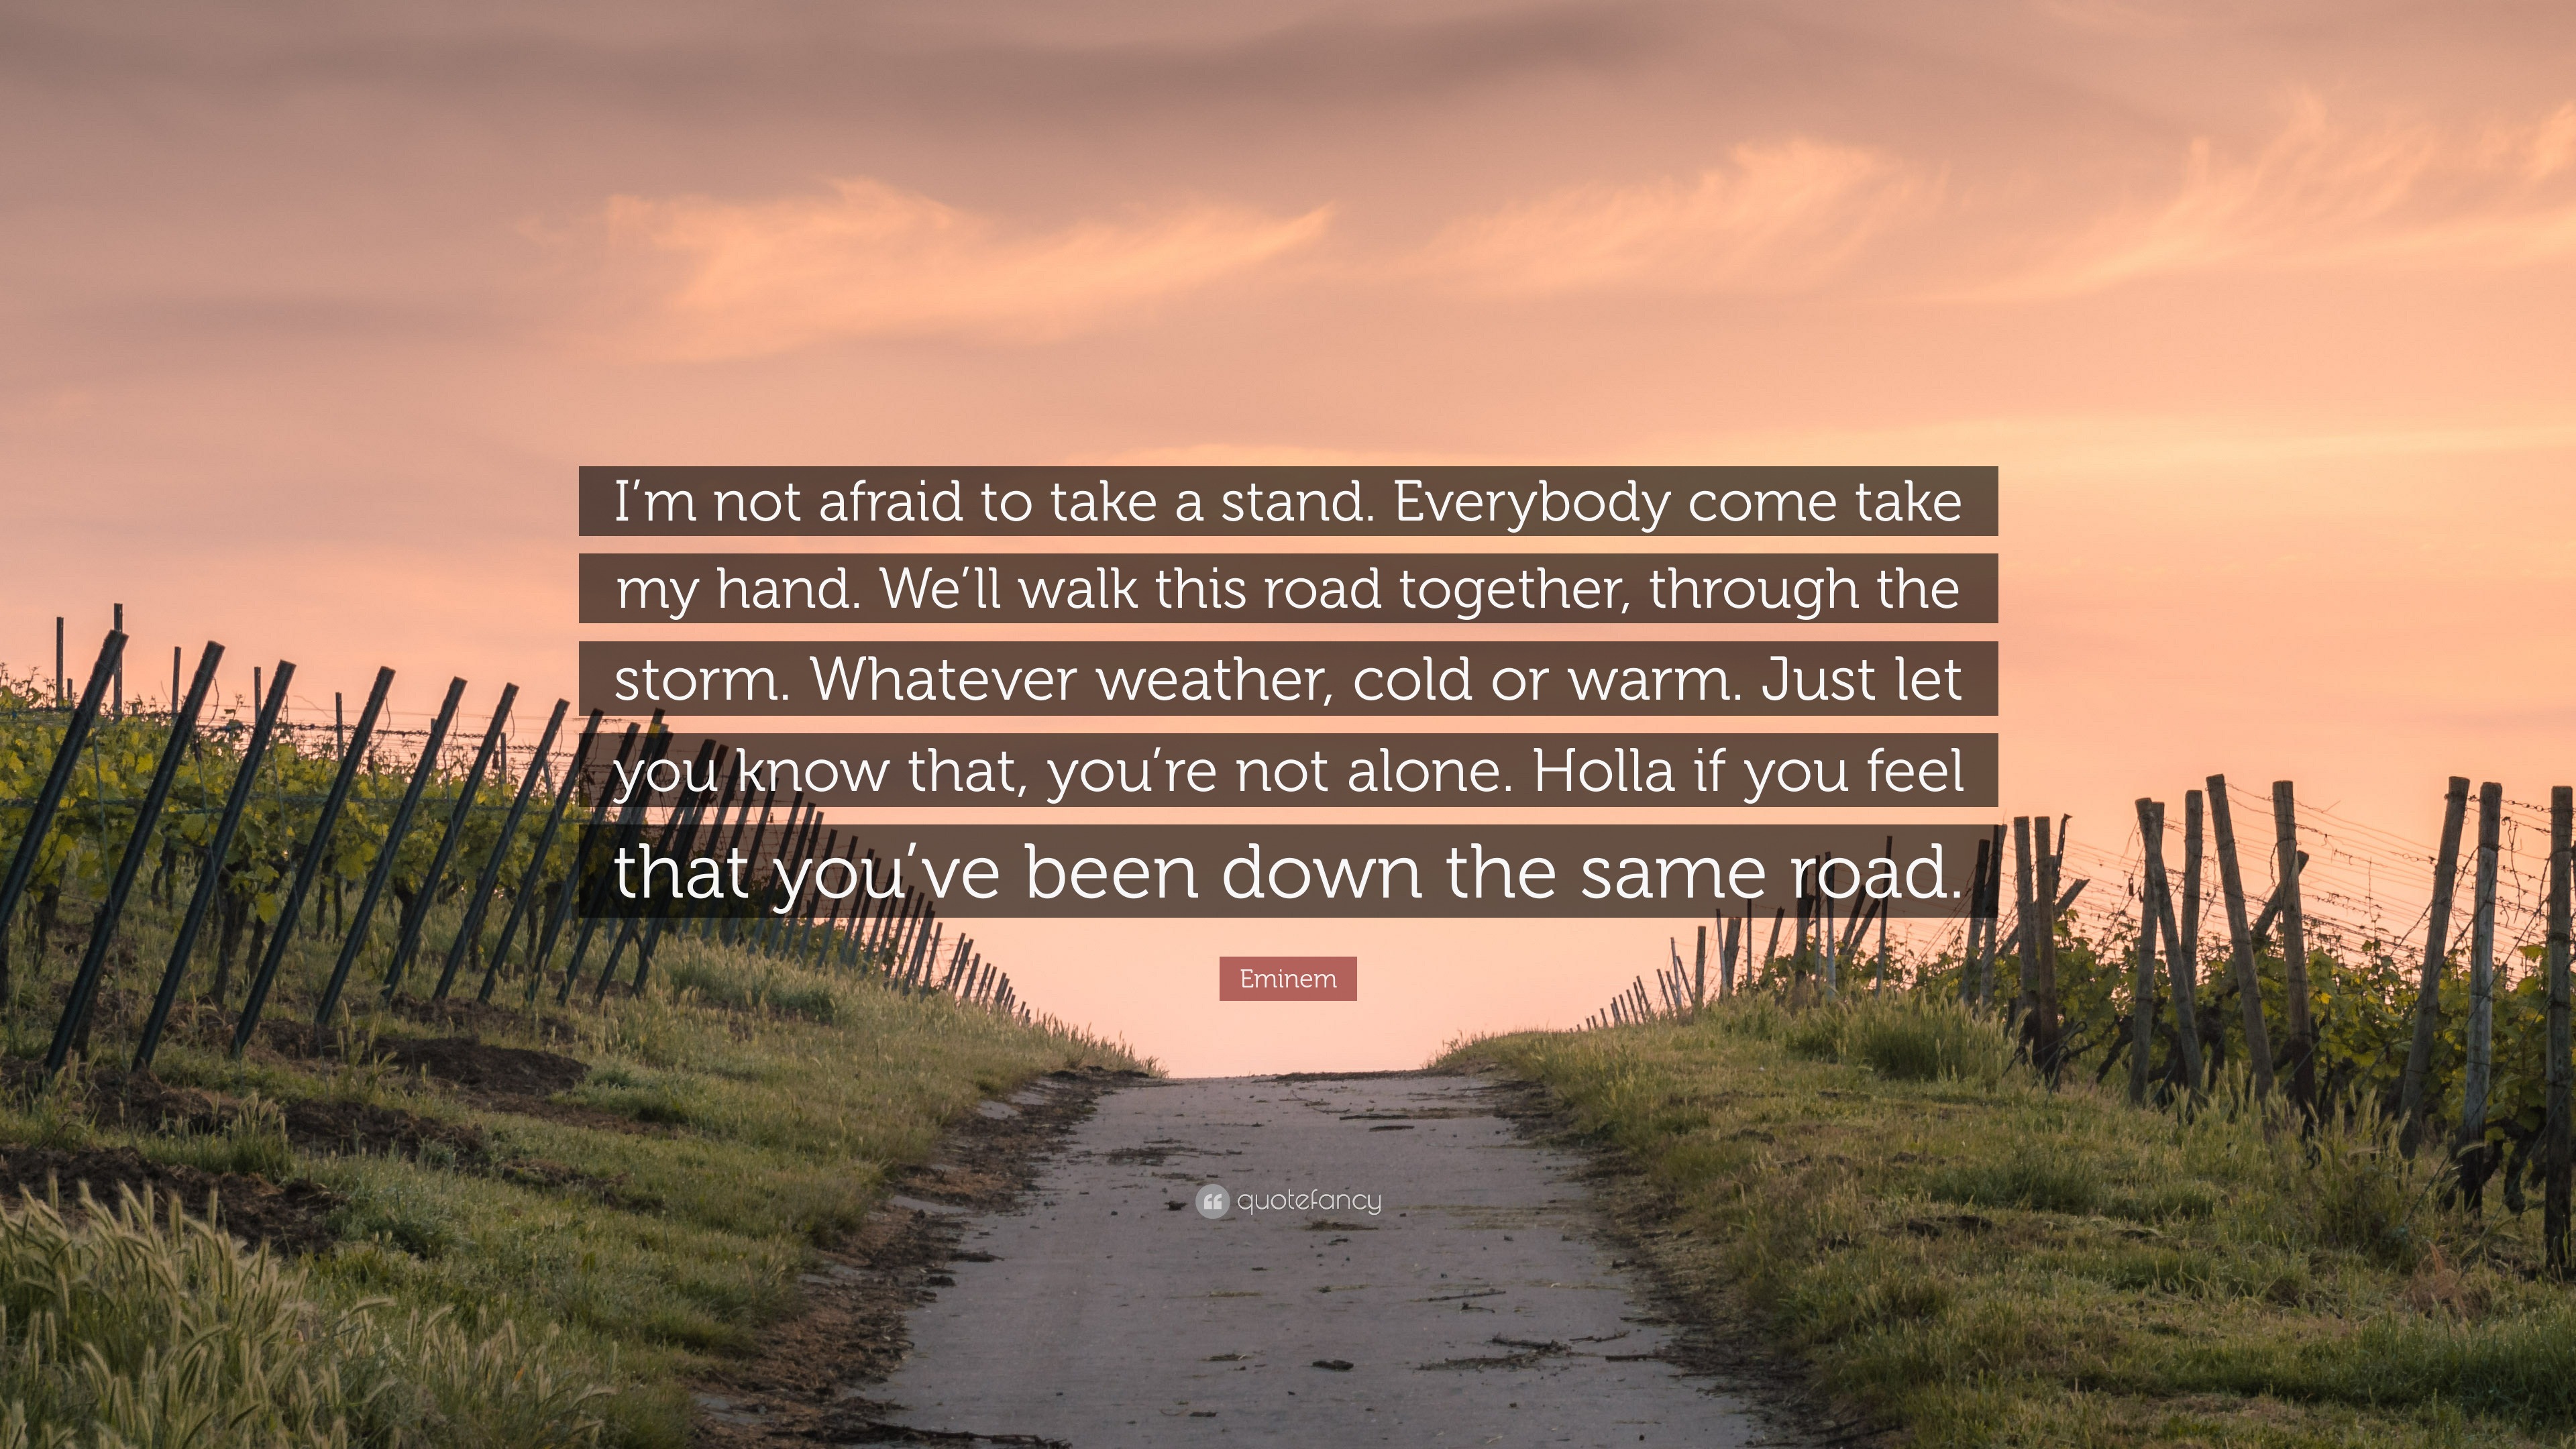 Eminem Quote: “I'm not afraid to take a stand. Everybody come take my hand.  We'll walk this road together, through the storm. Whatever ...”